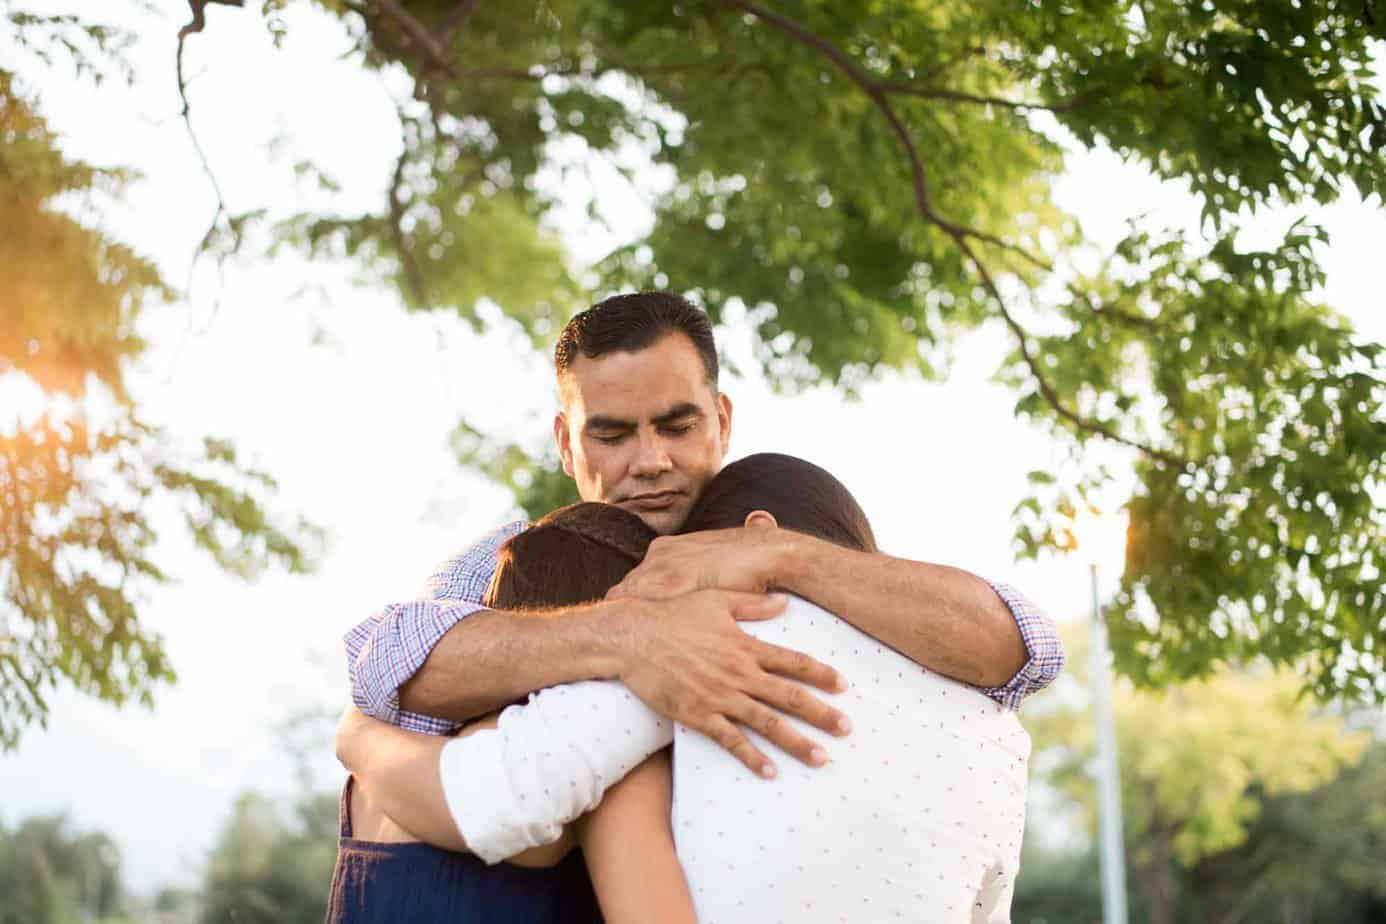 sad man hugging two females outside under a tree